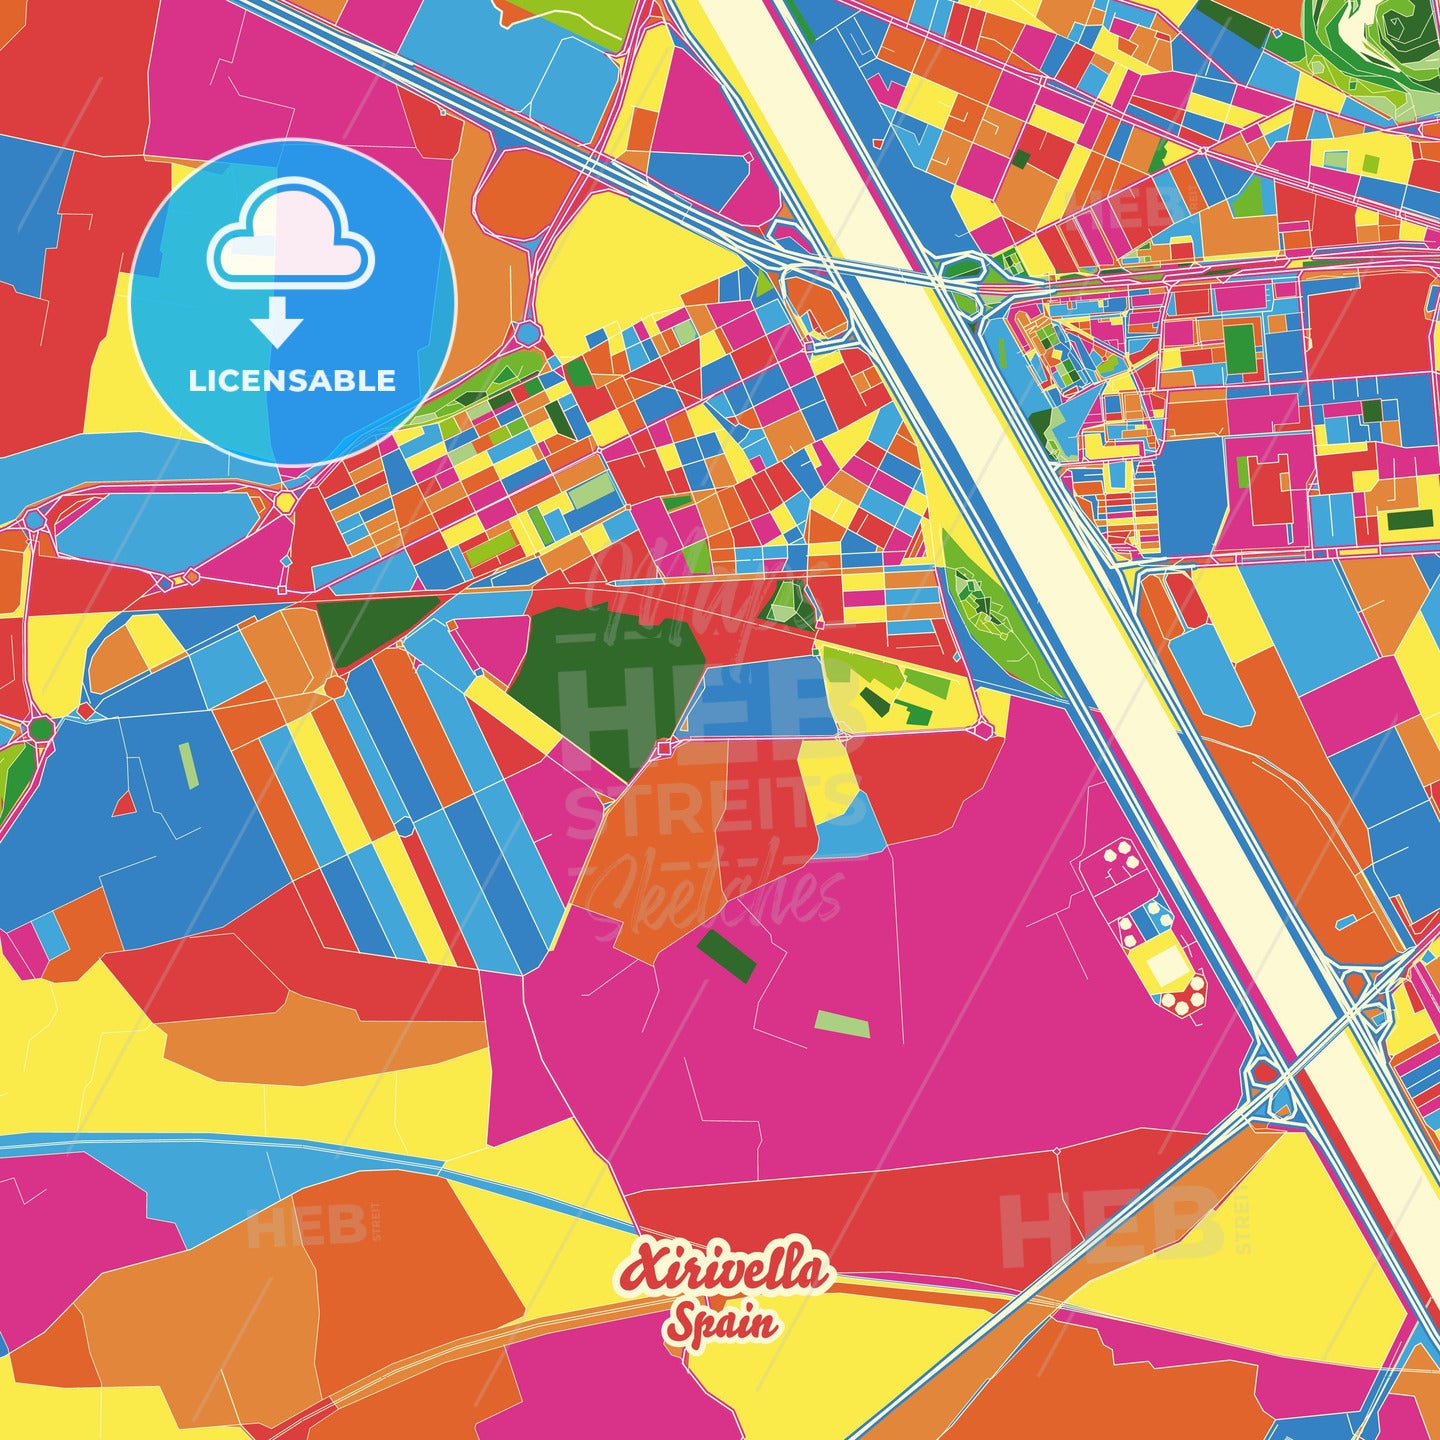 Xirivella, Spain Crazy Colorful Street Map Poster Template - HEBSTREITS Sketches